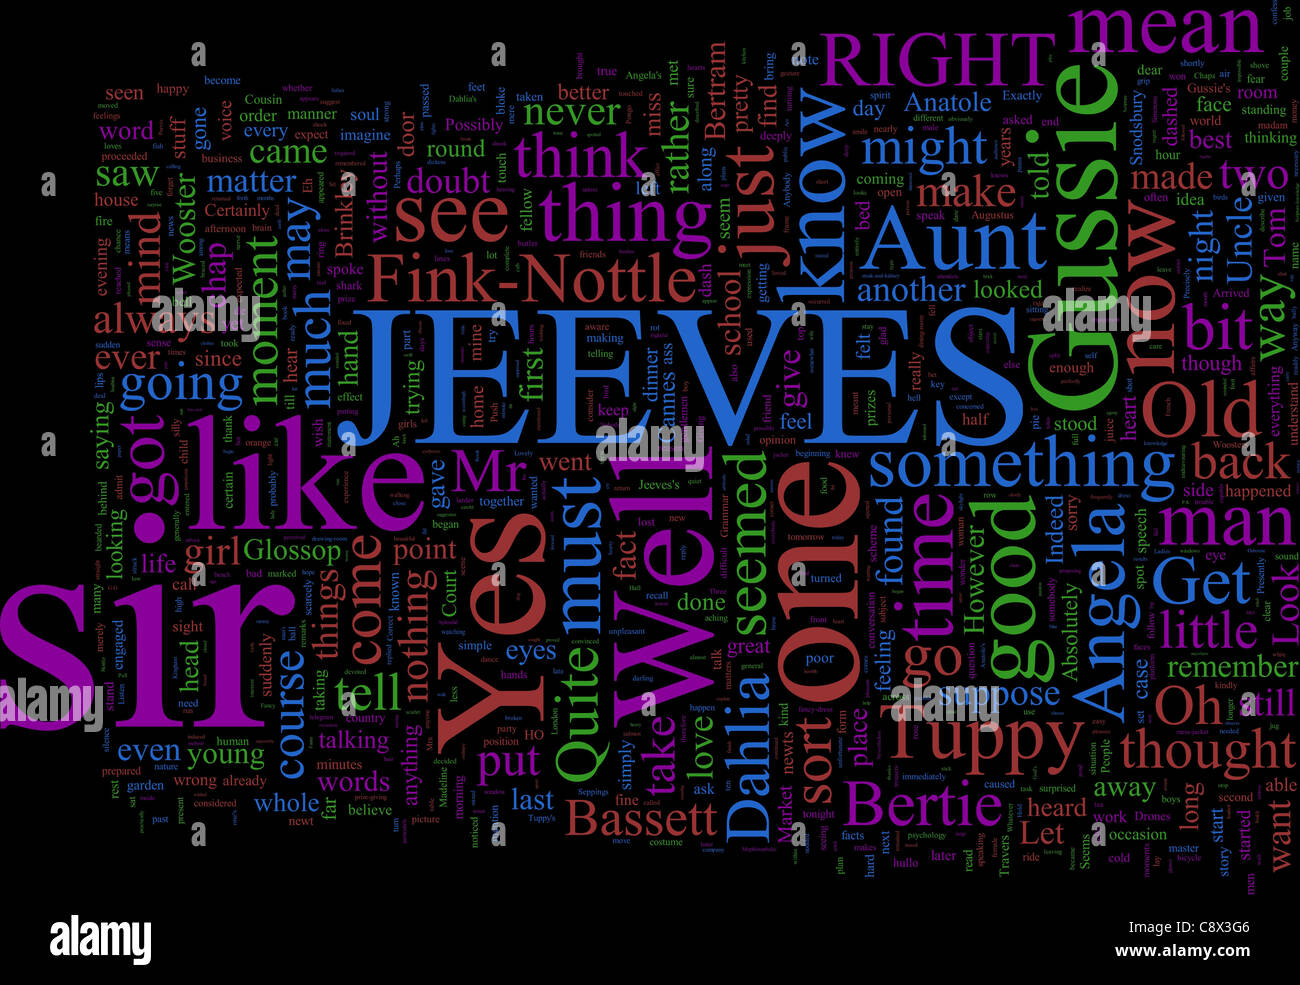 A Word Cloud Based on PG Wodehouse's Jeeves and Wooster Stories Stock Photo